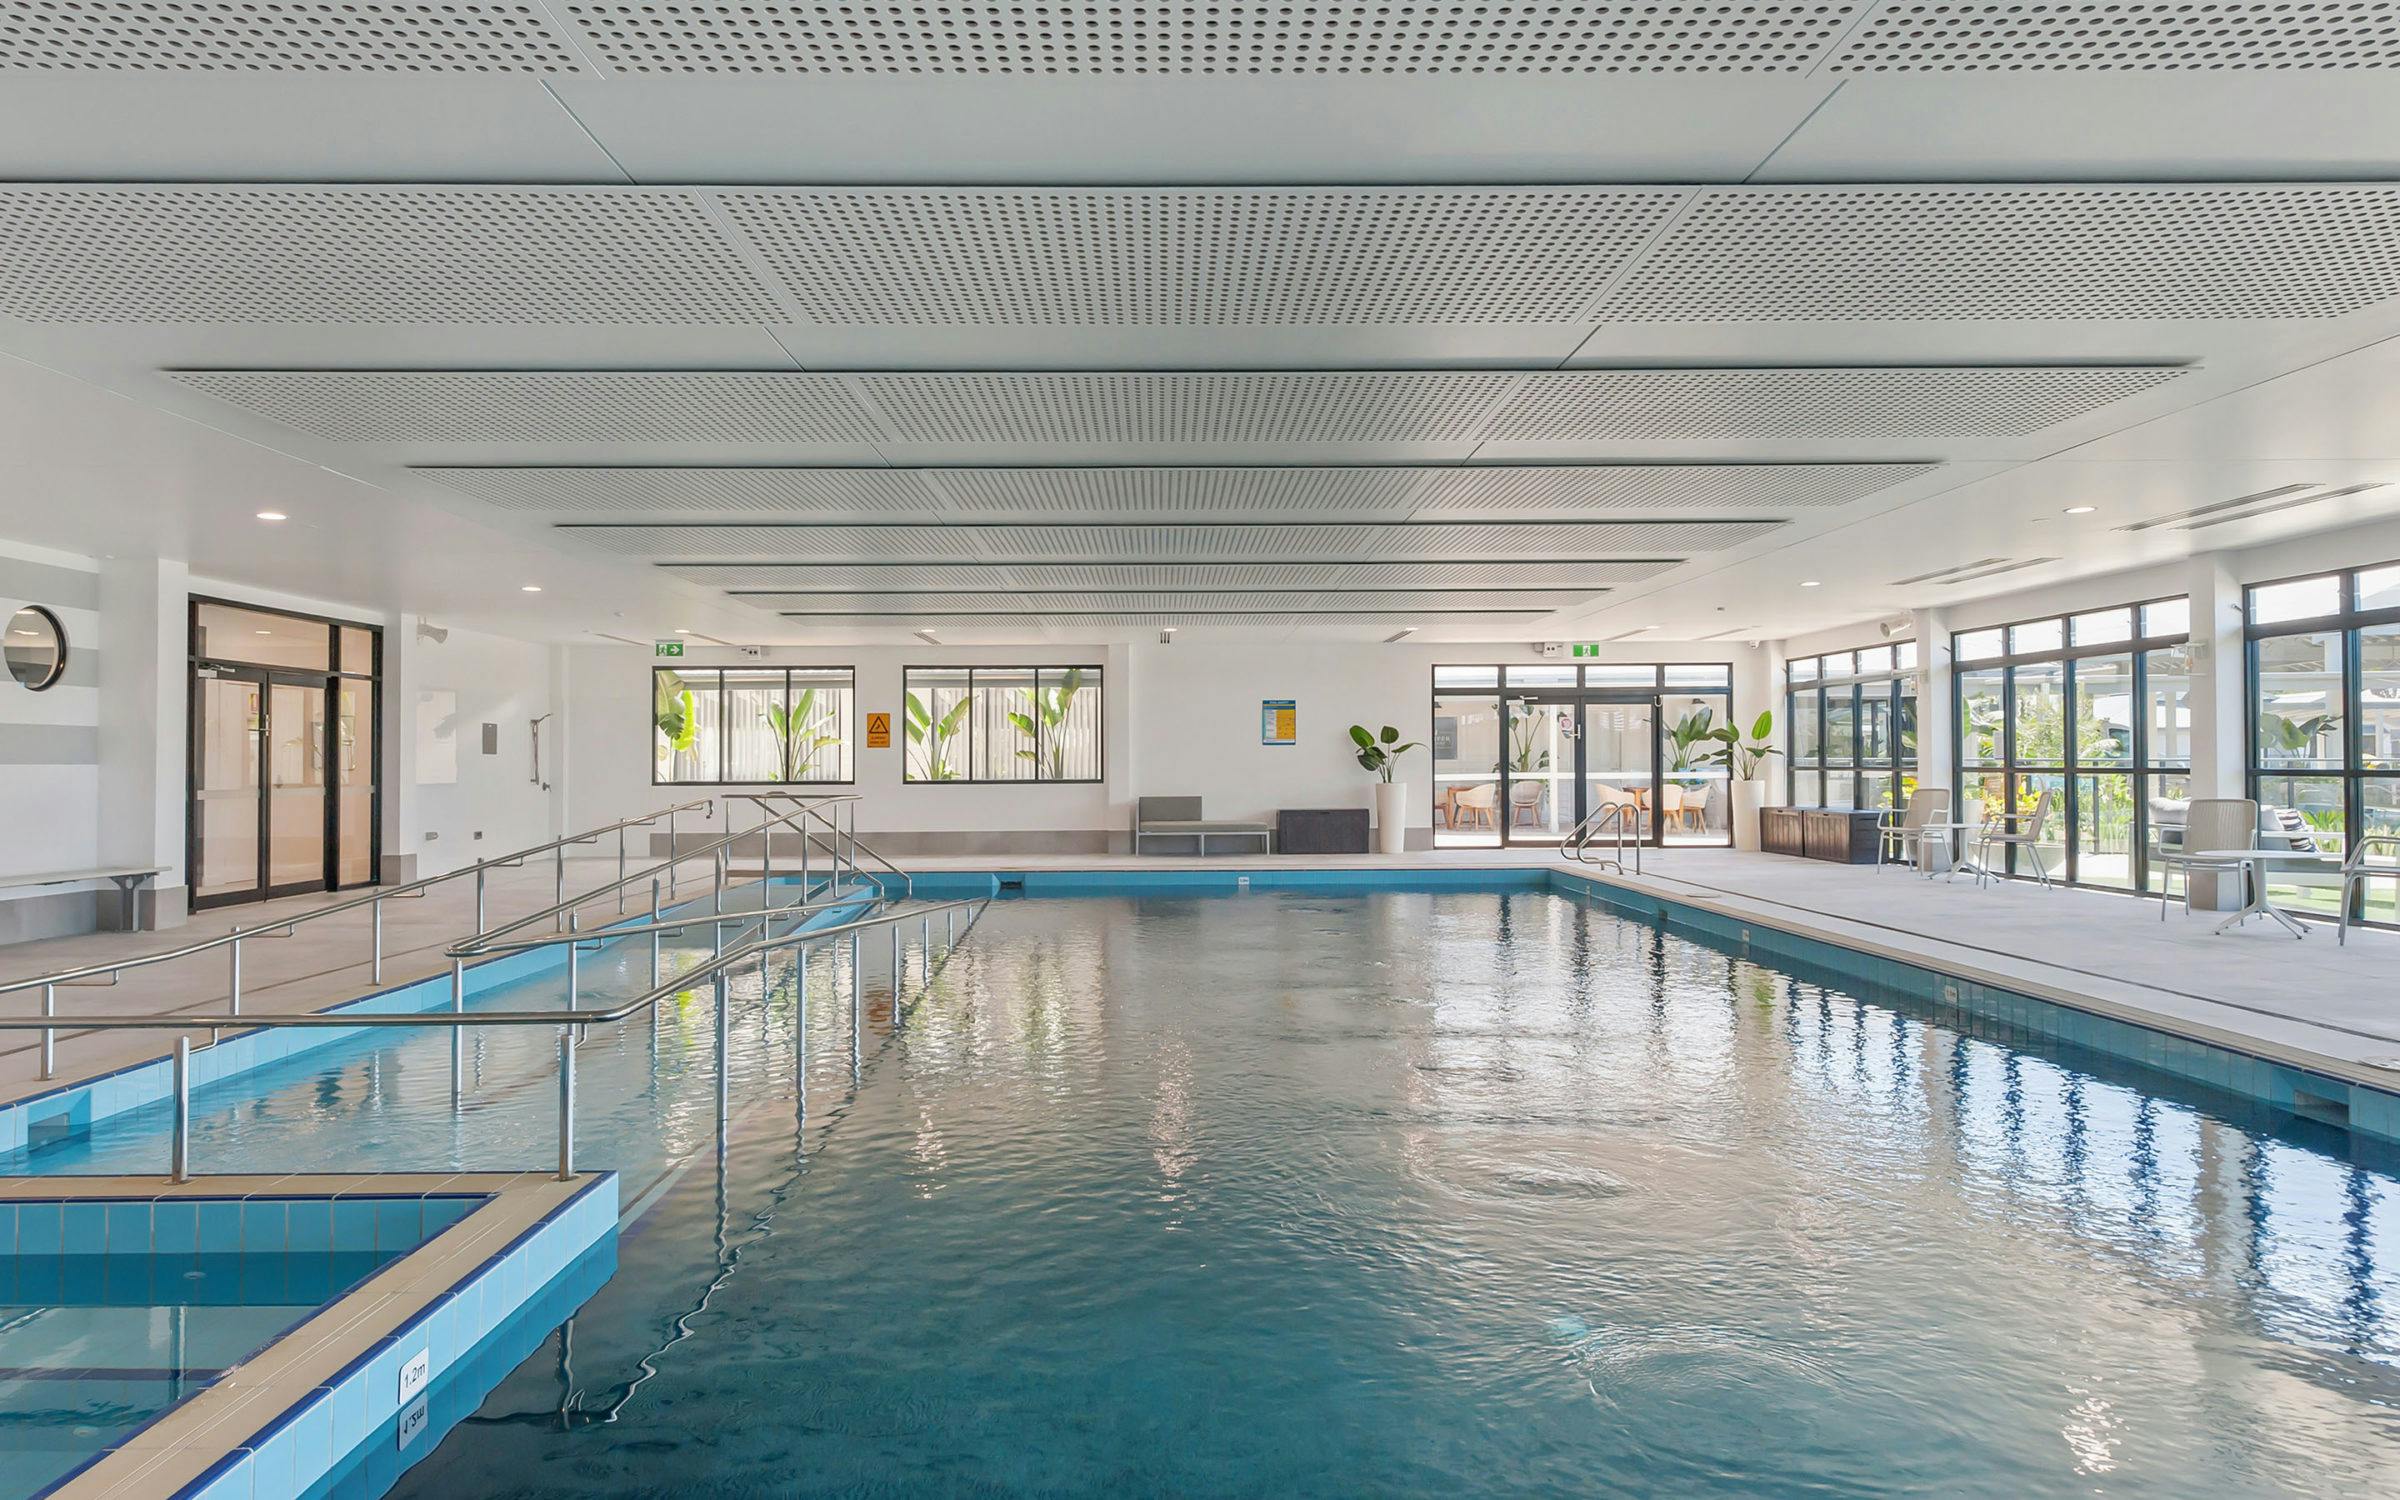 A shared indoor swimming pool